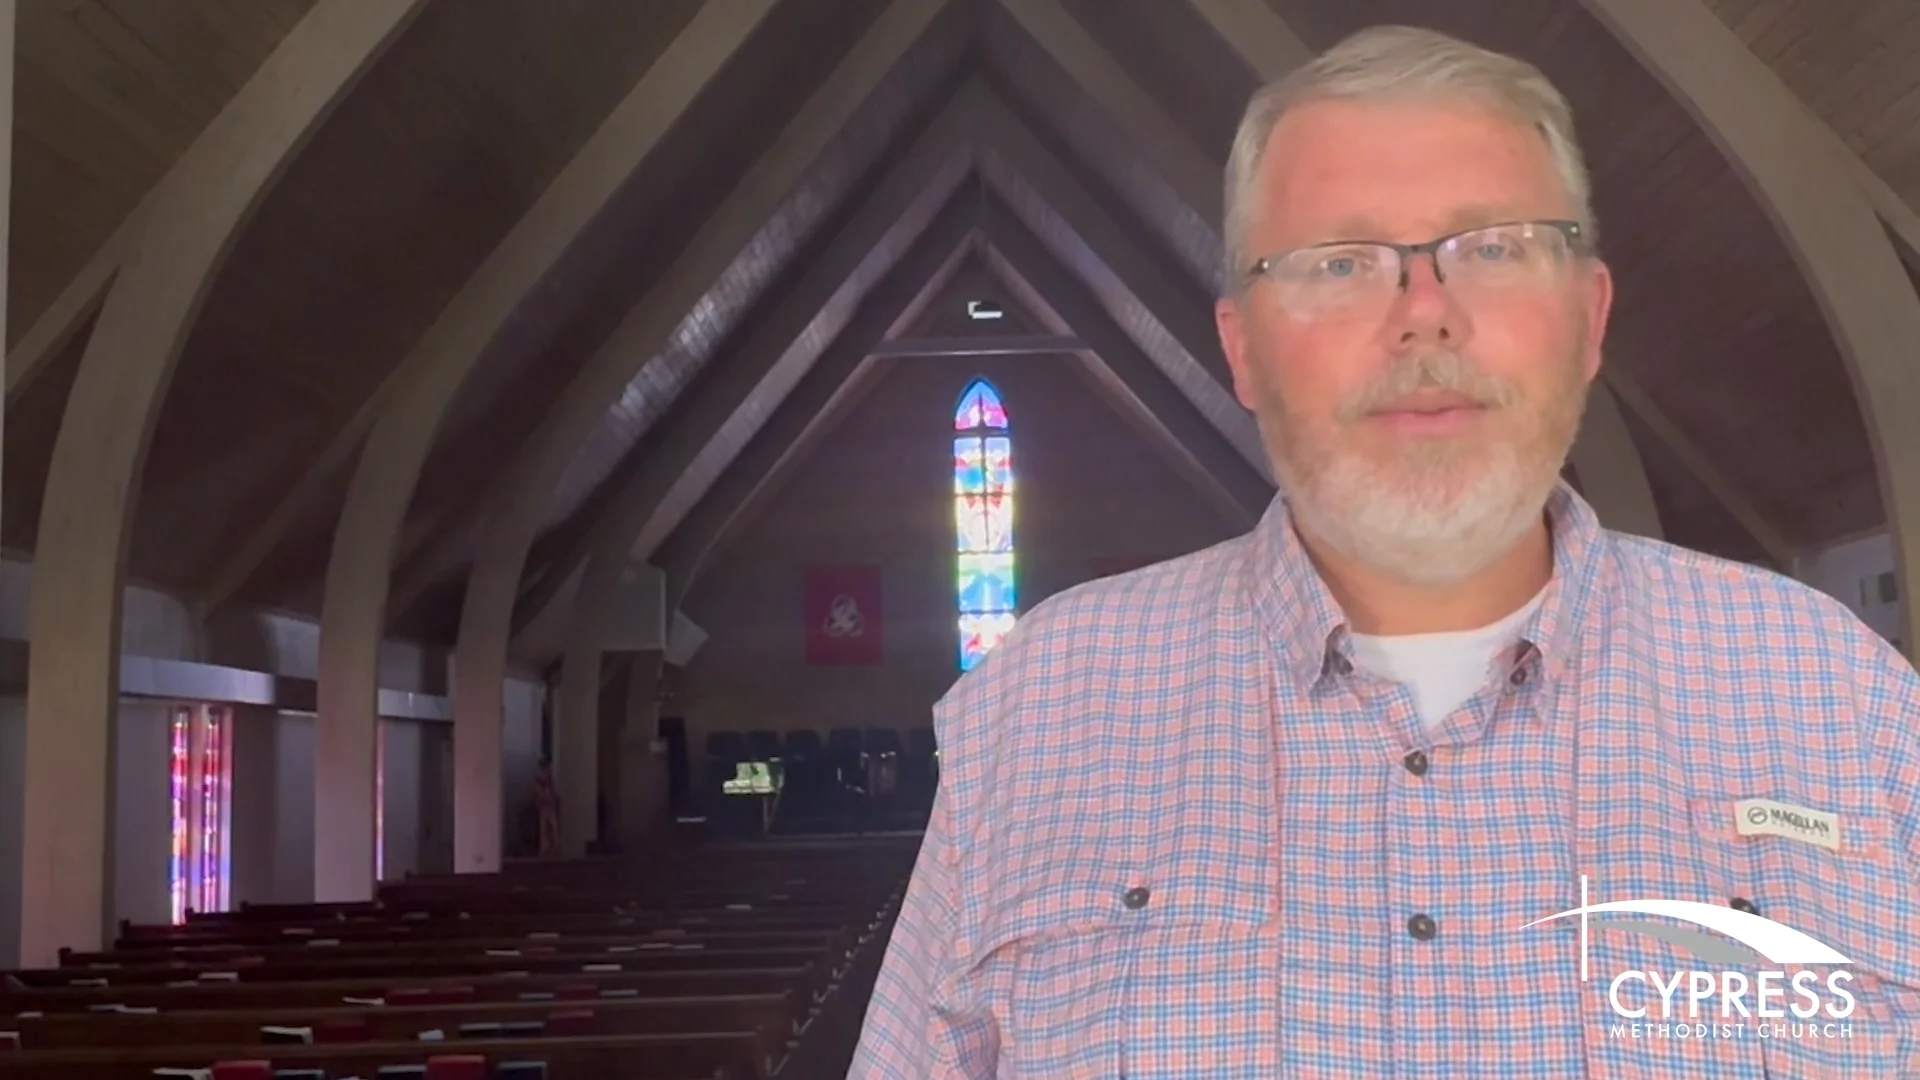 Storm Update From Our Senior Pastor on Vimeo